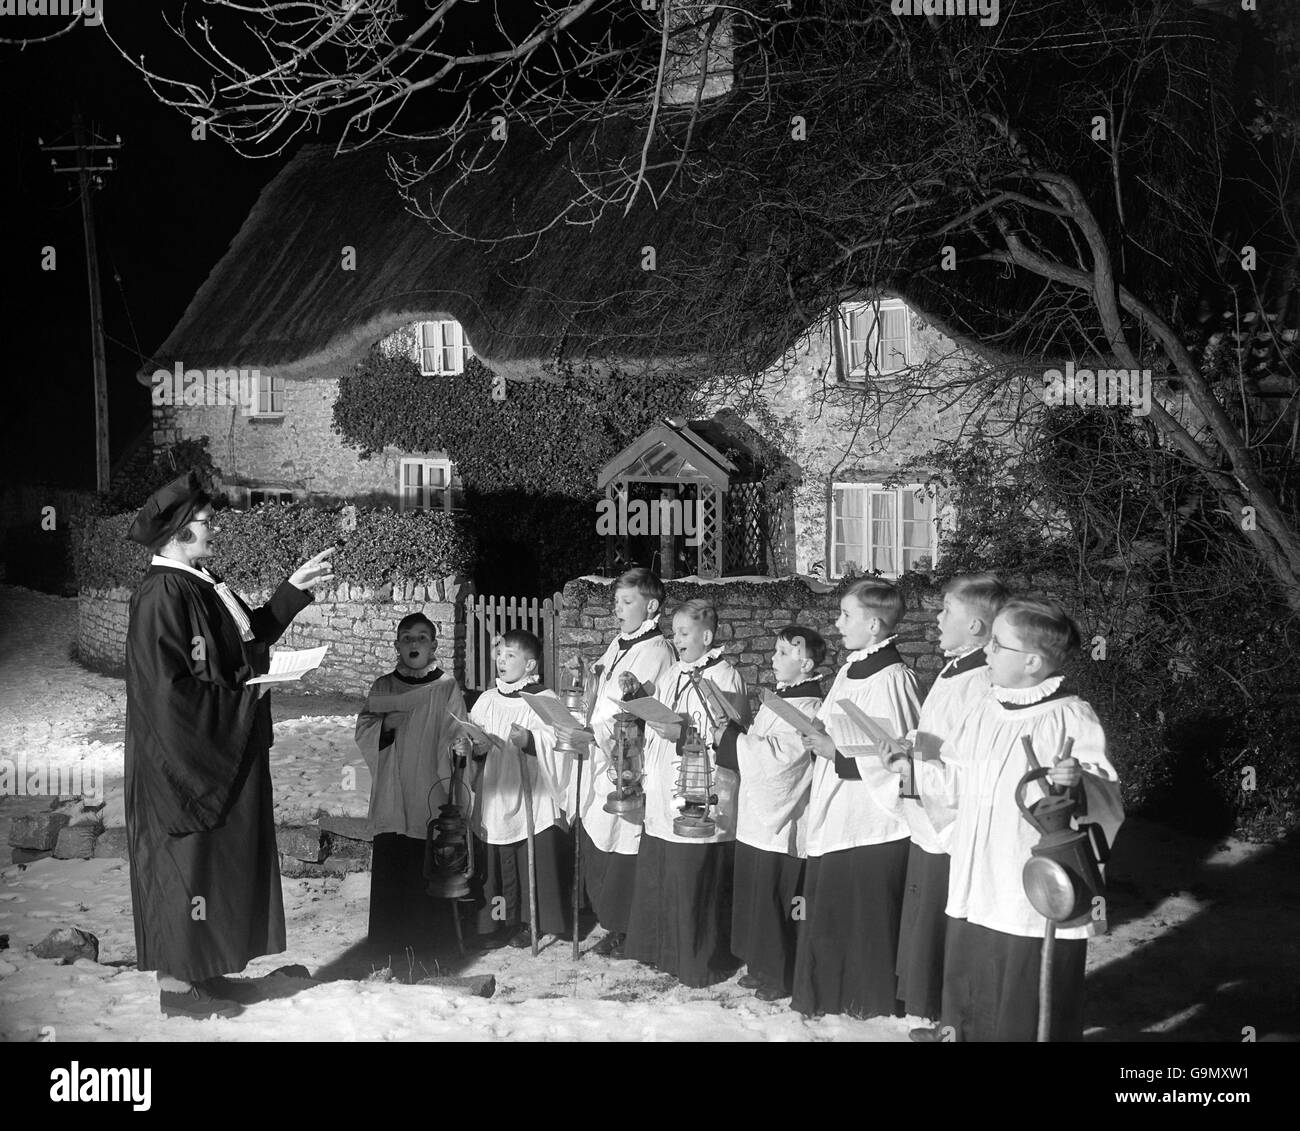 Undeterred by the snow underfoot, choristers of St. Andrew's Parish Church, Backwell, Somerset, led by their choirmistress, Mrs A Skinner, made an early start in their annual tour of carol singing around the village. Stock Photo